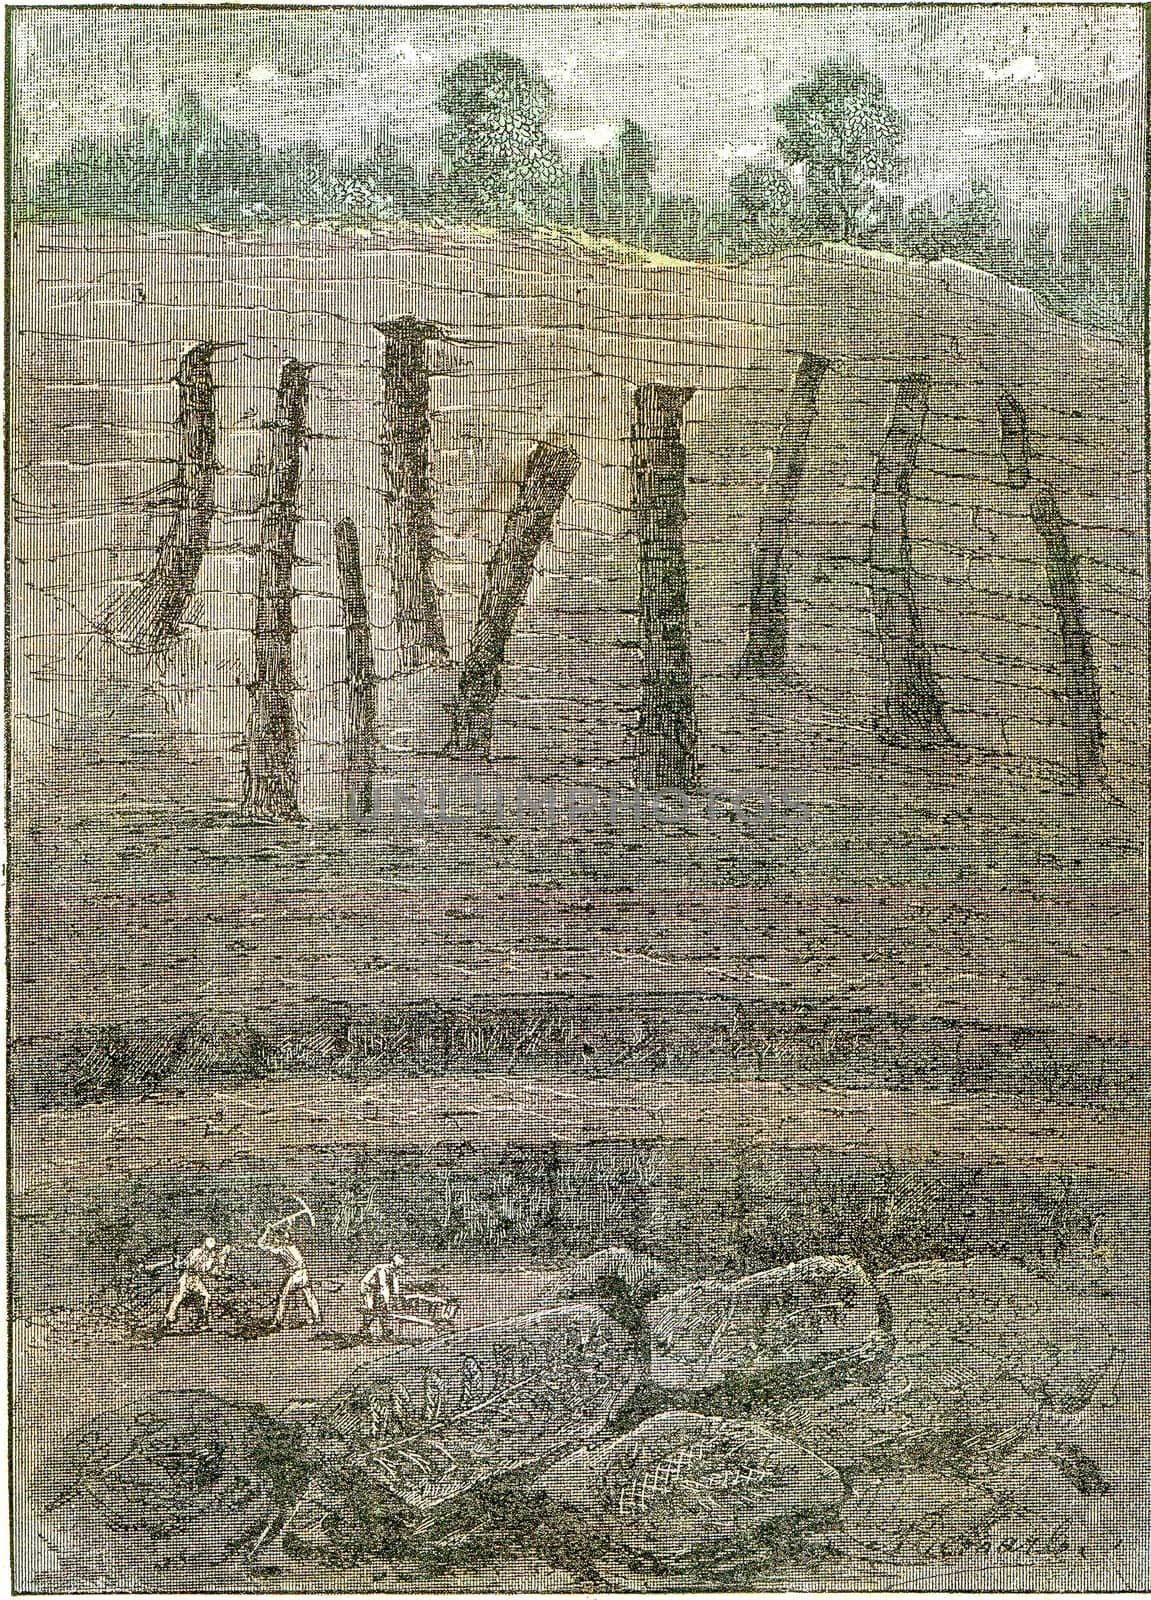 Trunks of fossil trees from the colliery period, in the old mine hoist a saint Etienne, vintage engraved illustration. From Natural Creation and Living Beings.
